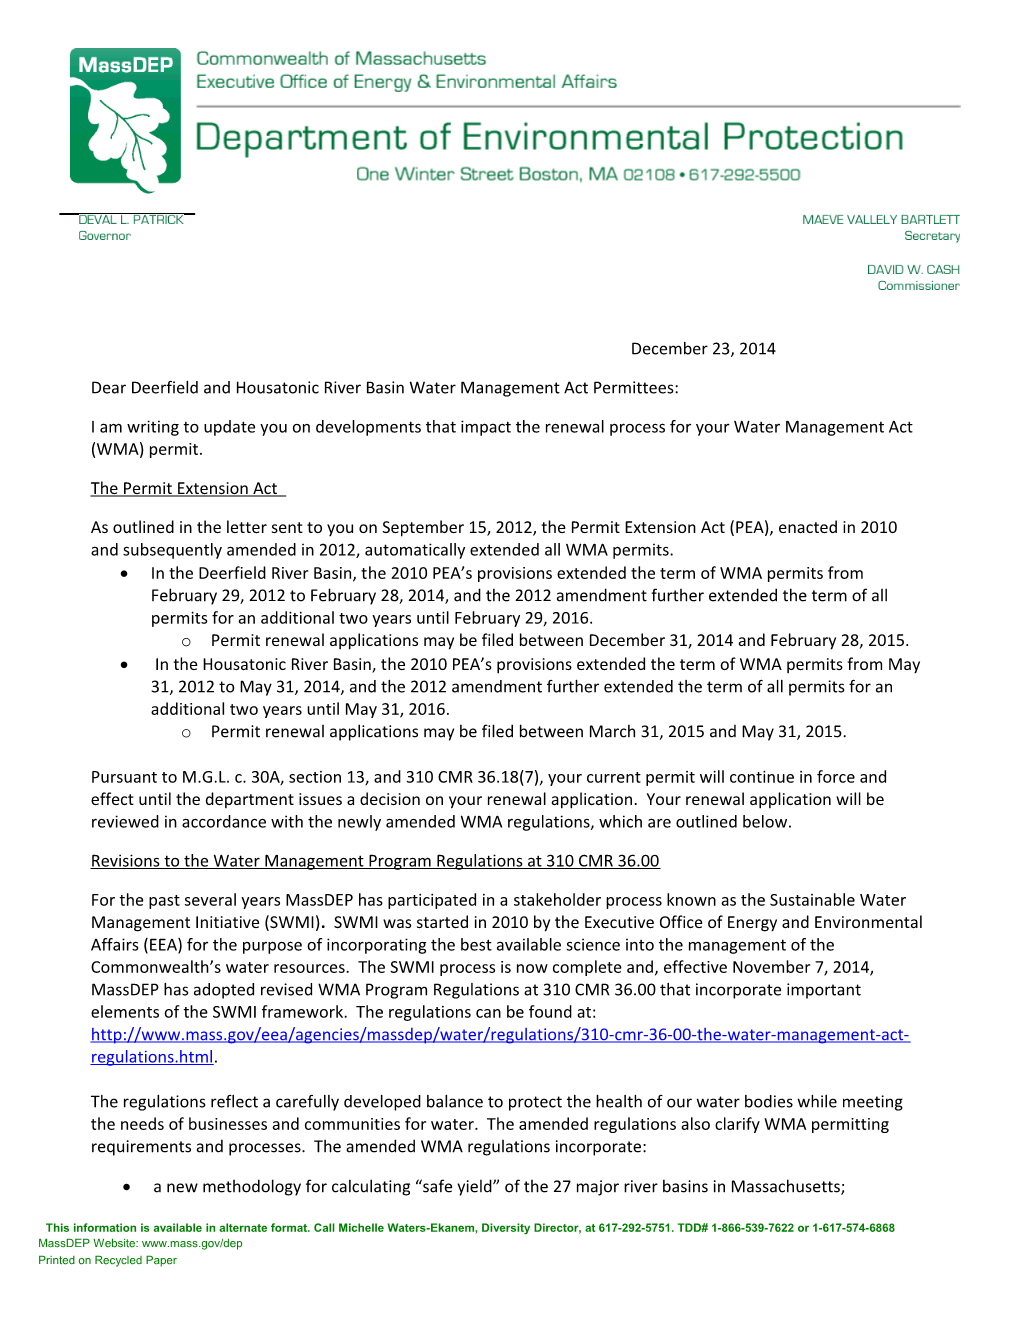 Dear Deerfield and Housatonic River Basinwater Management Act Permittees